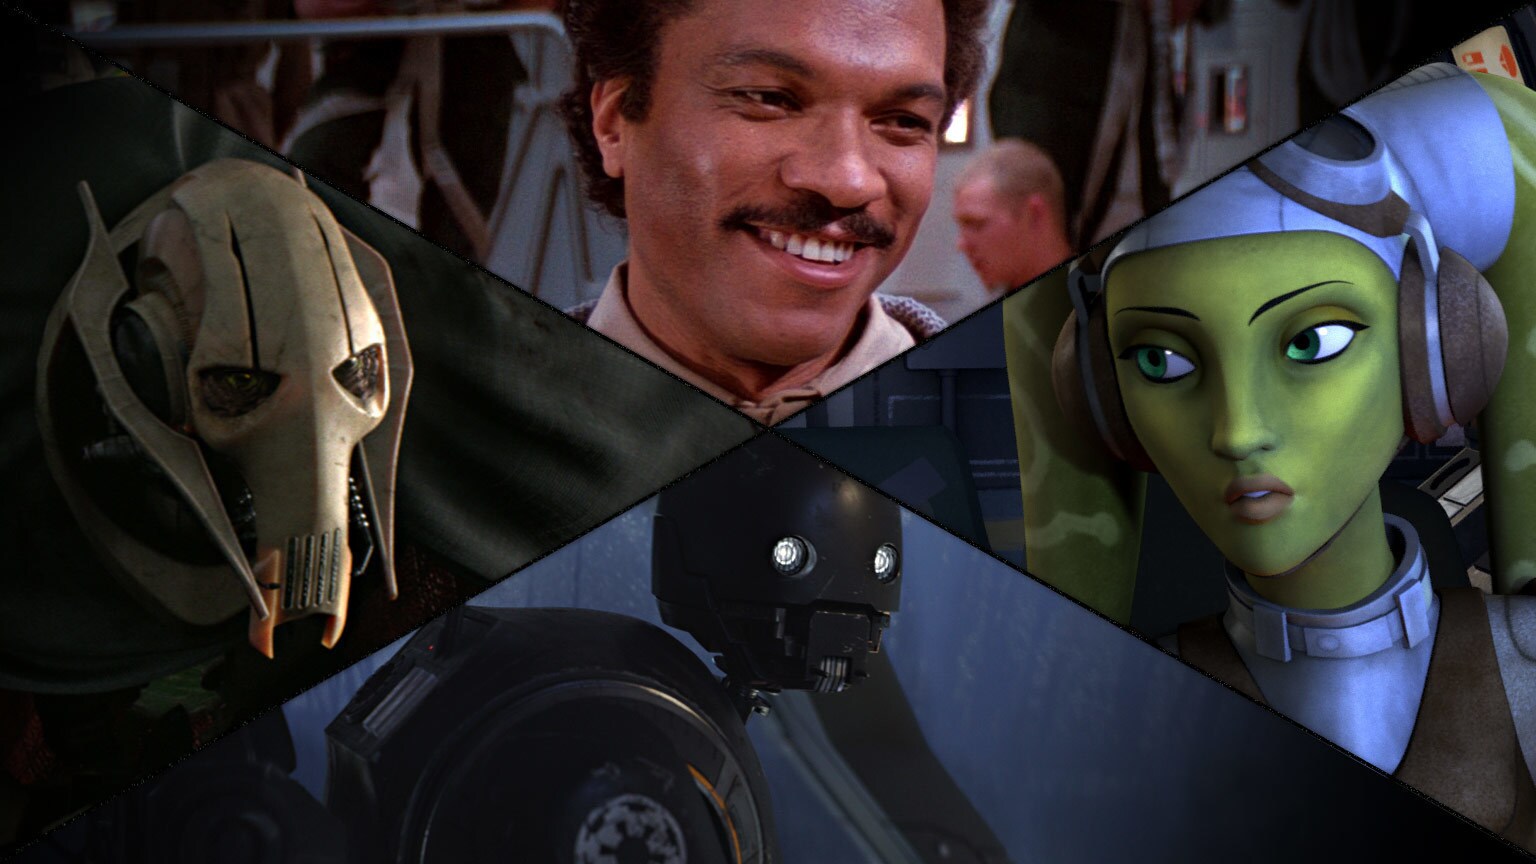 Billy Dee Williams, Alan Tudyk, and More Coming to Star Wars Celebration Orlando